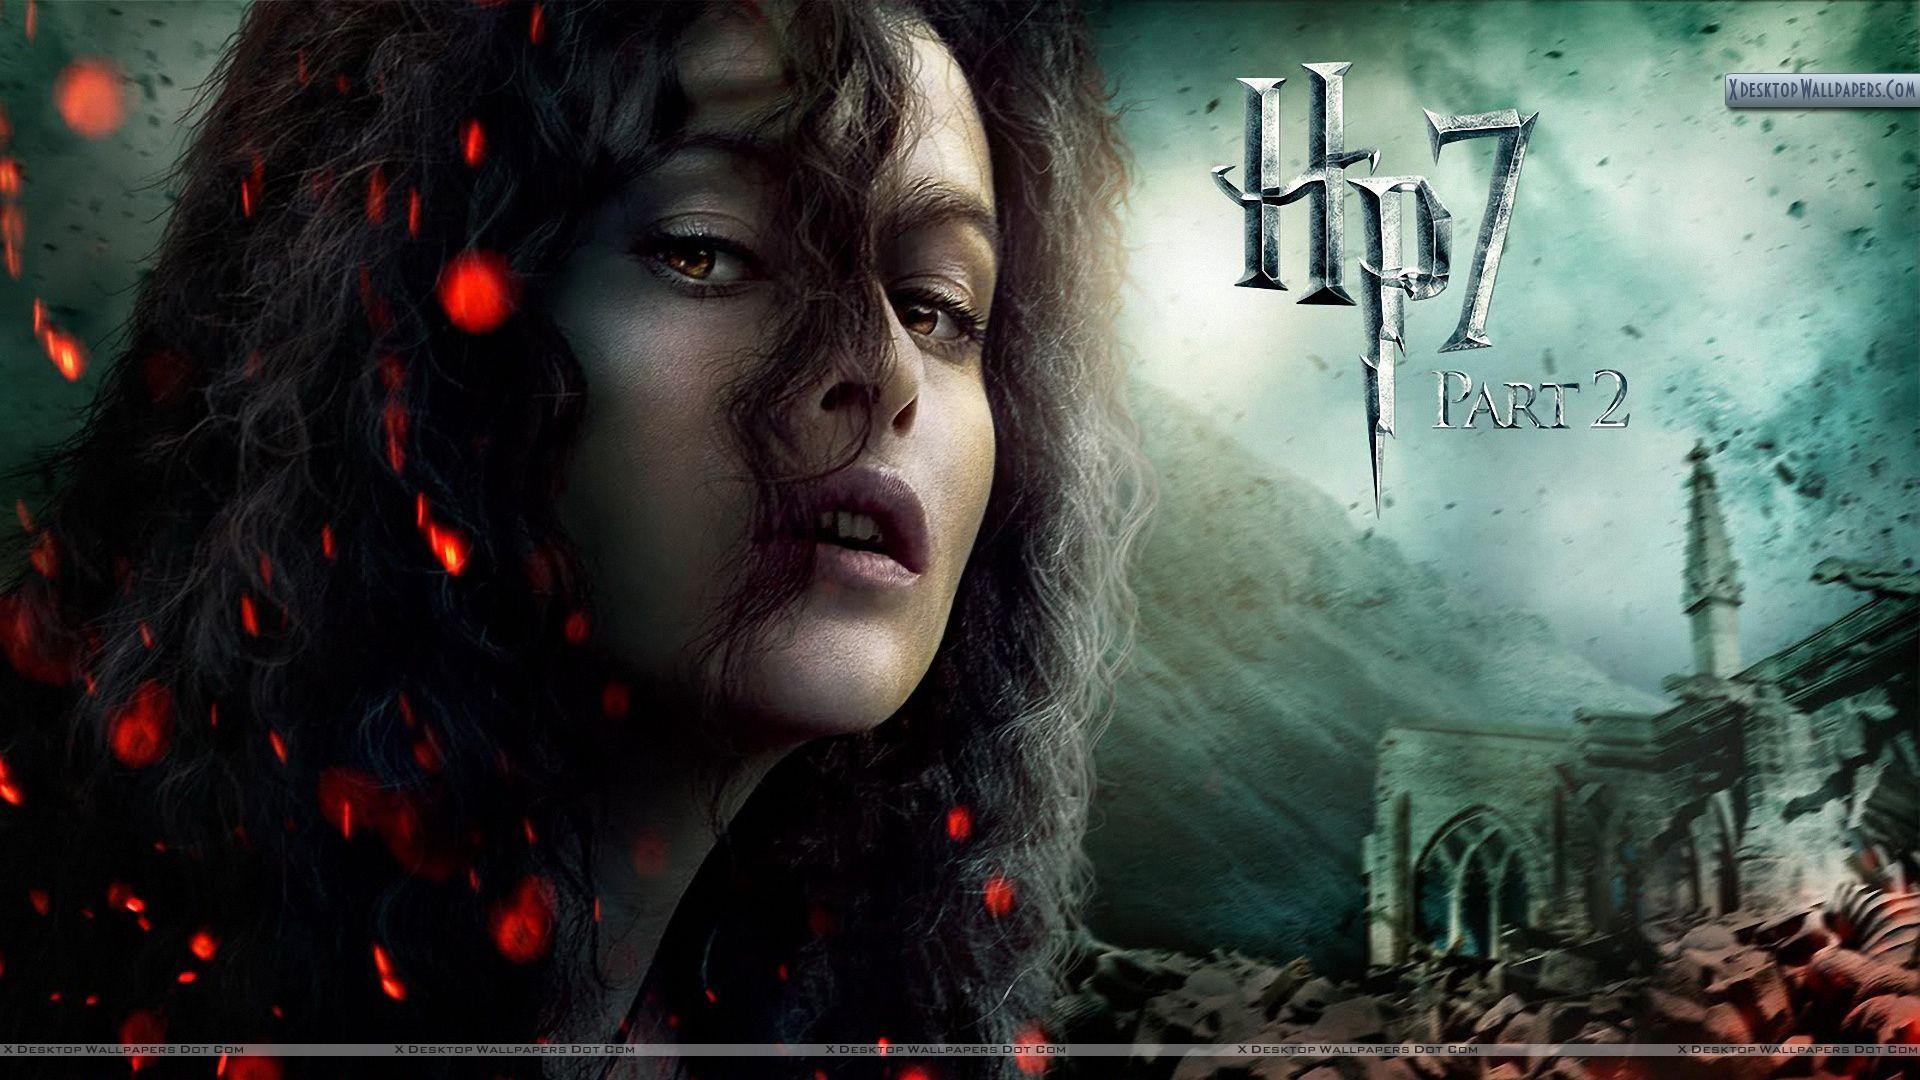 Helena Bonham Carter Face Closeups In Harry Potter And The Deathly